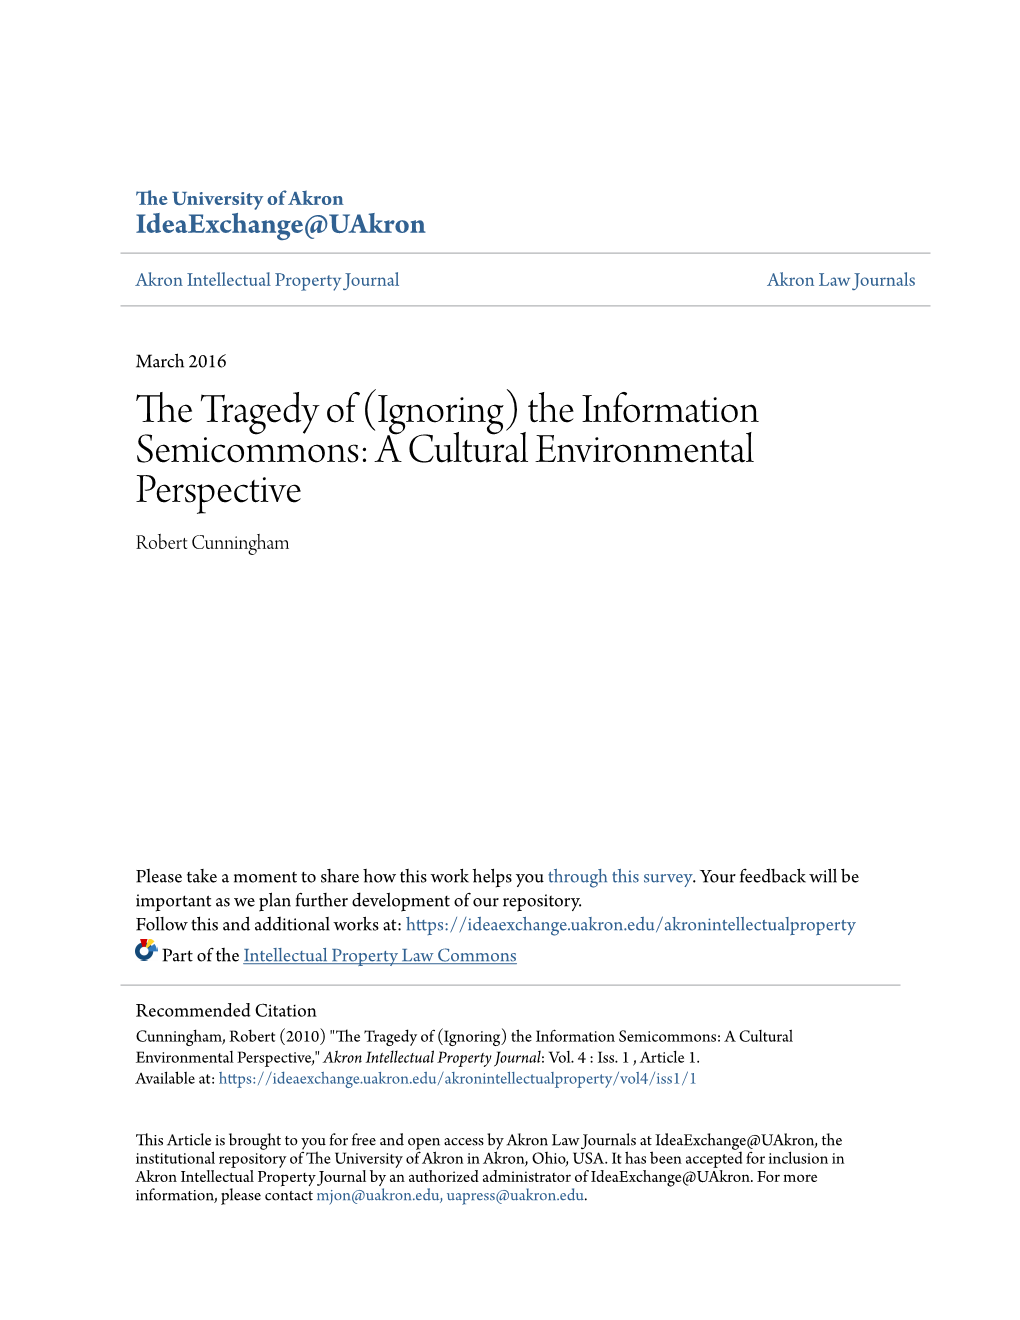 The Tragedy of (Ignoring) the Information Semicommons: a Cultural Environmental Perspective